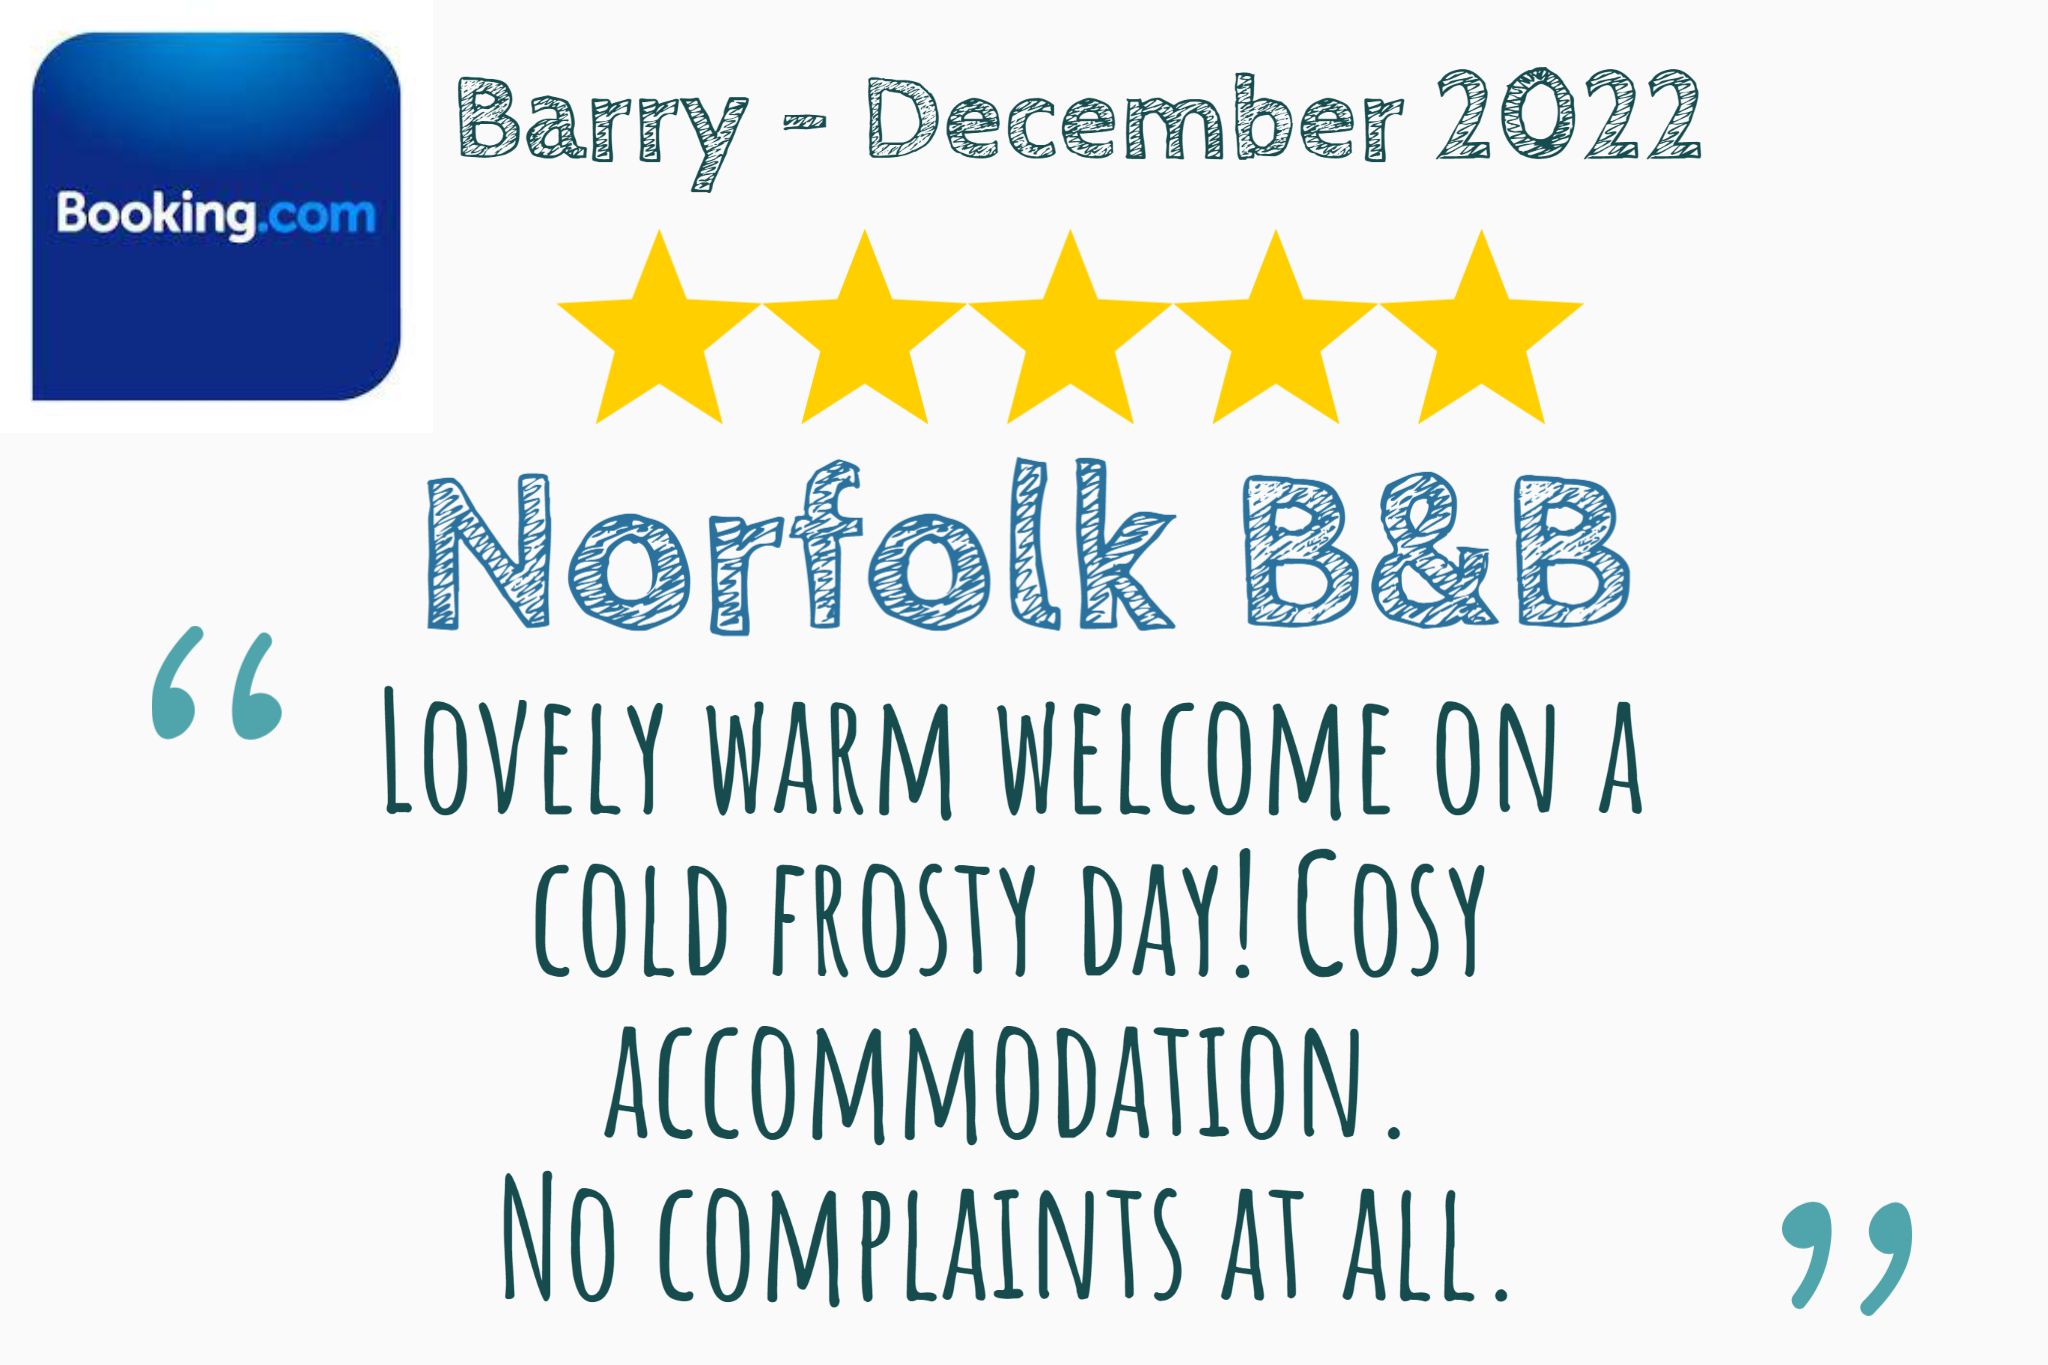 Barry's Booking.com review of a warm welcome on a cold, frosty day